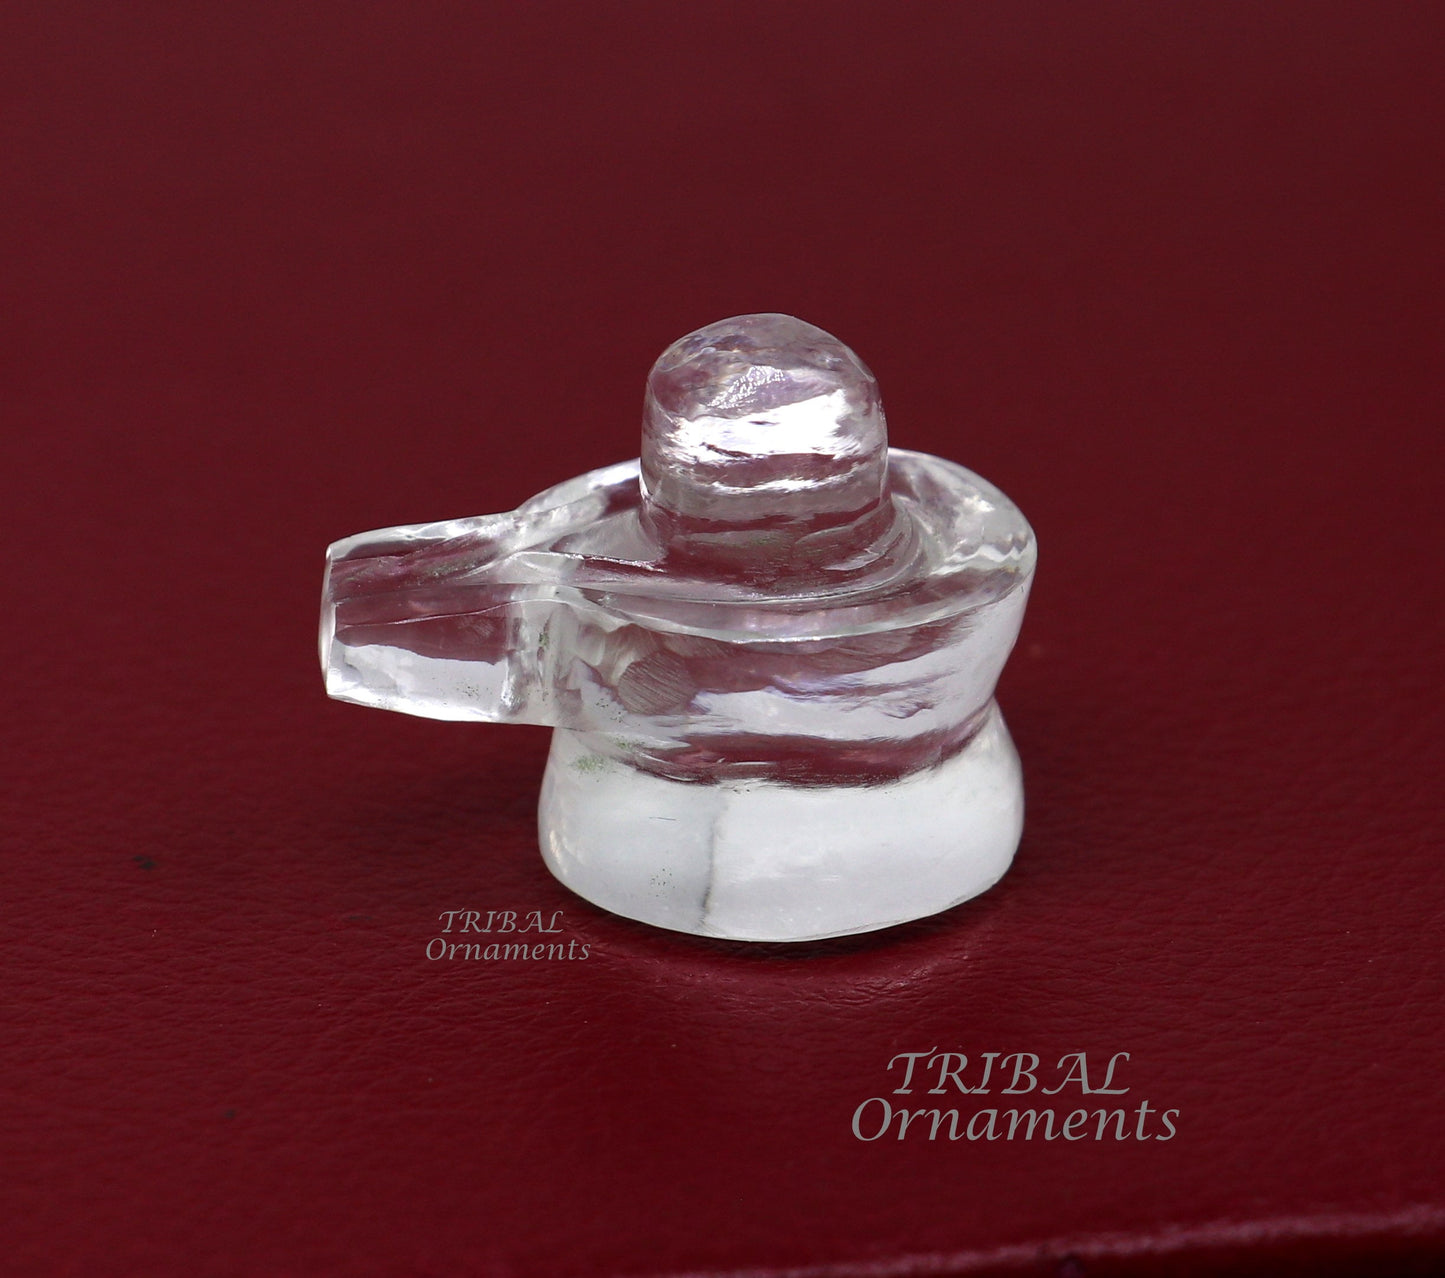 Natural sphatik crystal stone divine lor shiva lingam statue, amazing sphatik lingam puja article for wealth and prosperity stna19 - TRIBAL ORNAMENTS